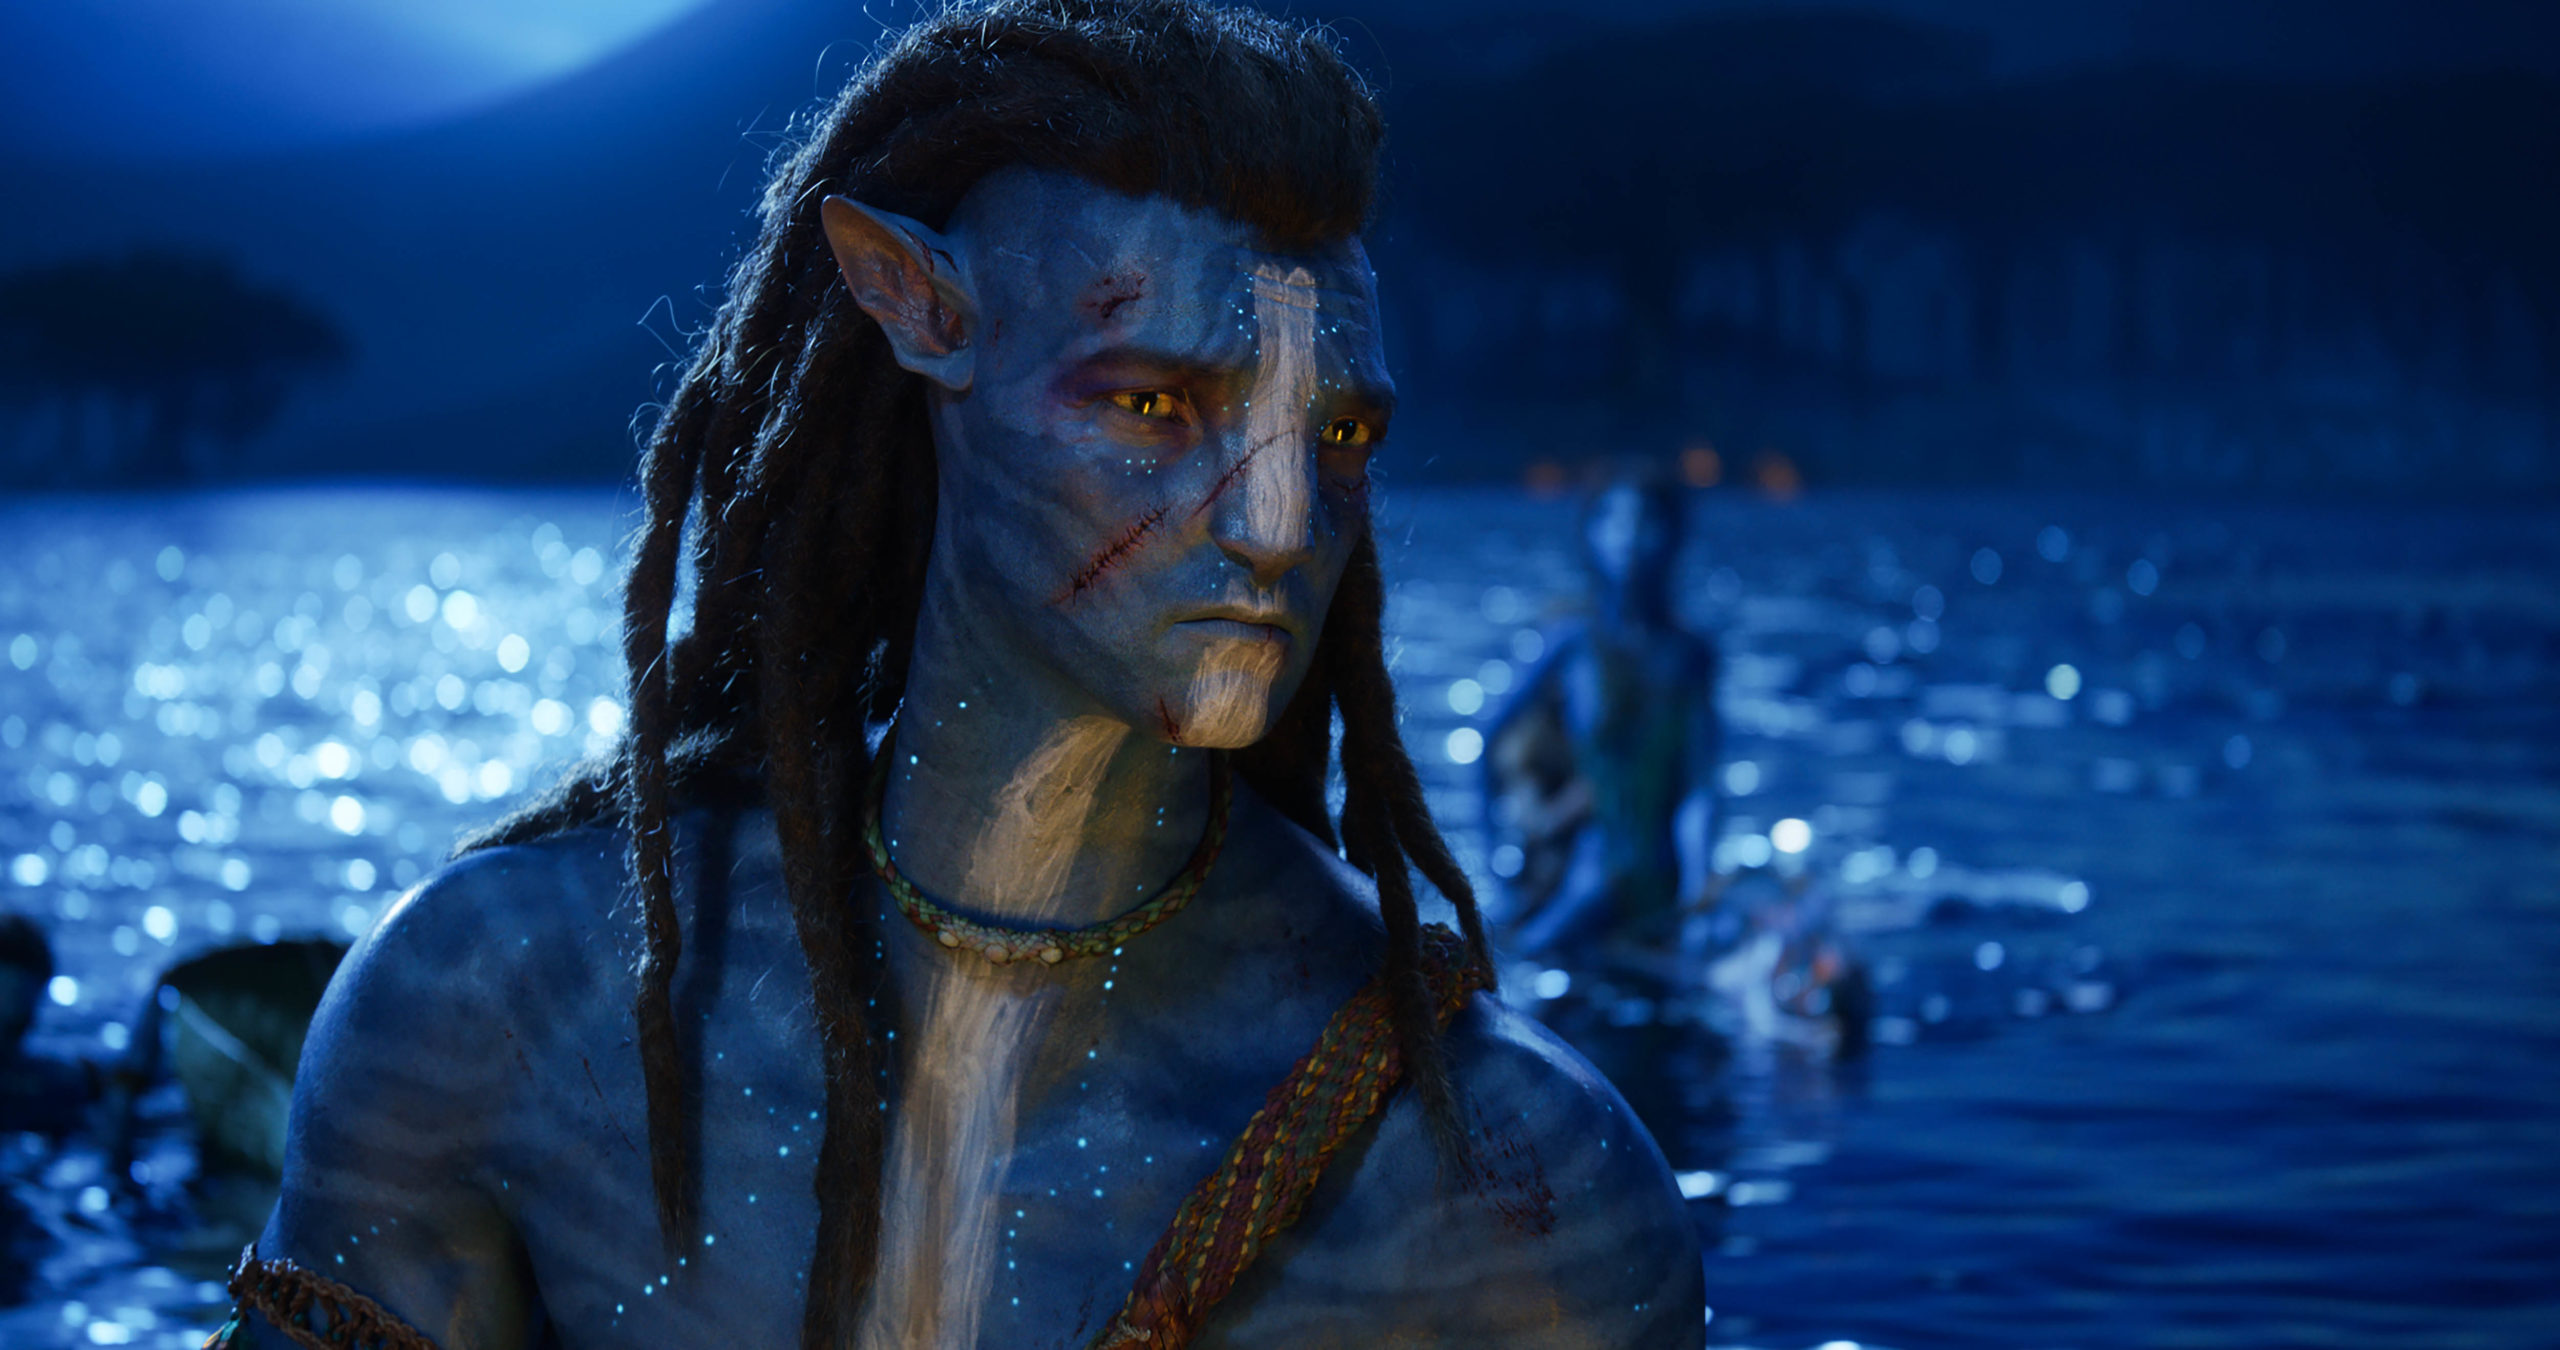 SCUBAJET got its role in AVATAR – The Way of Water